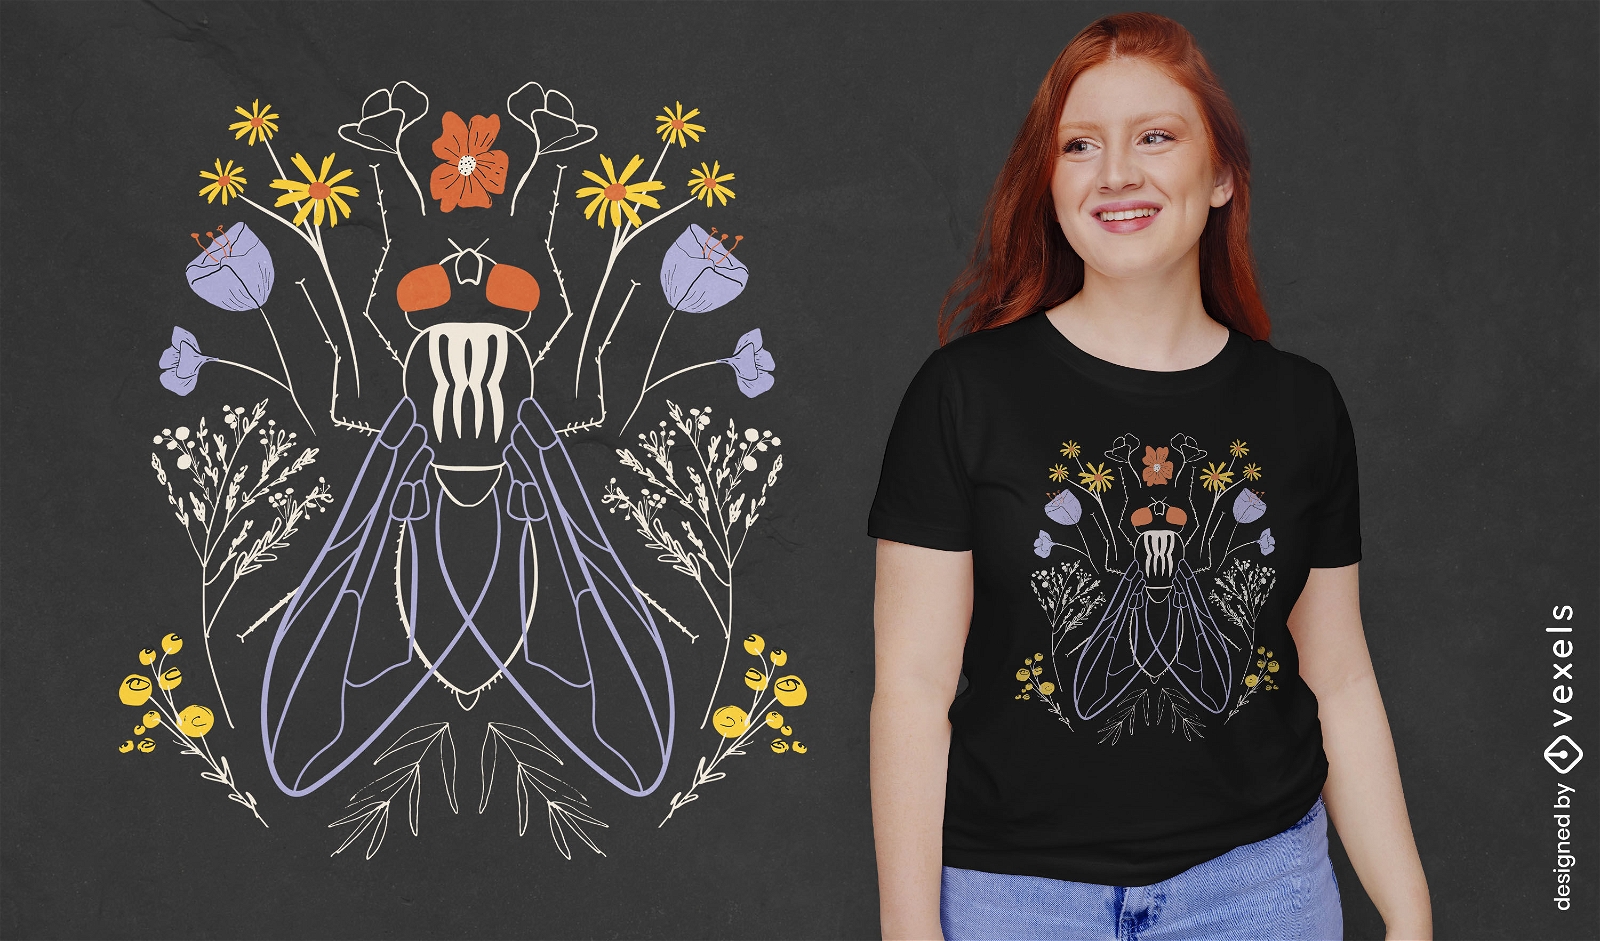 Bug and flowers nature t-shirt design